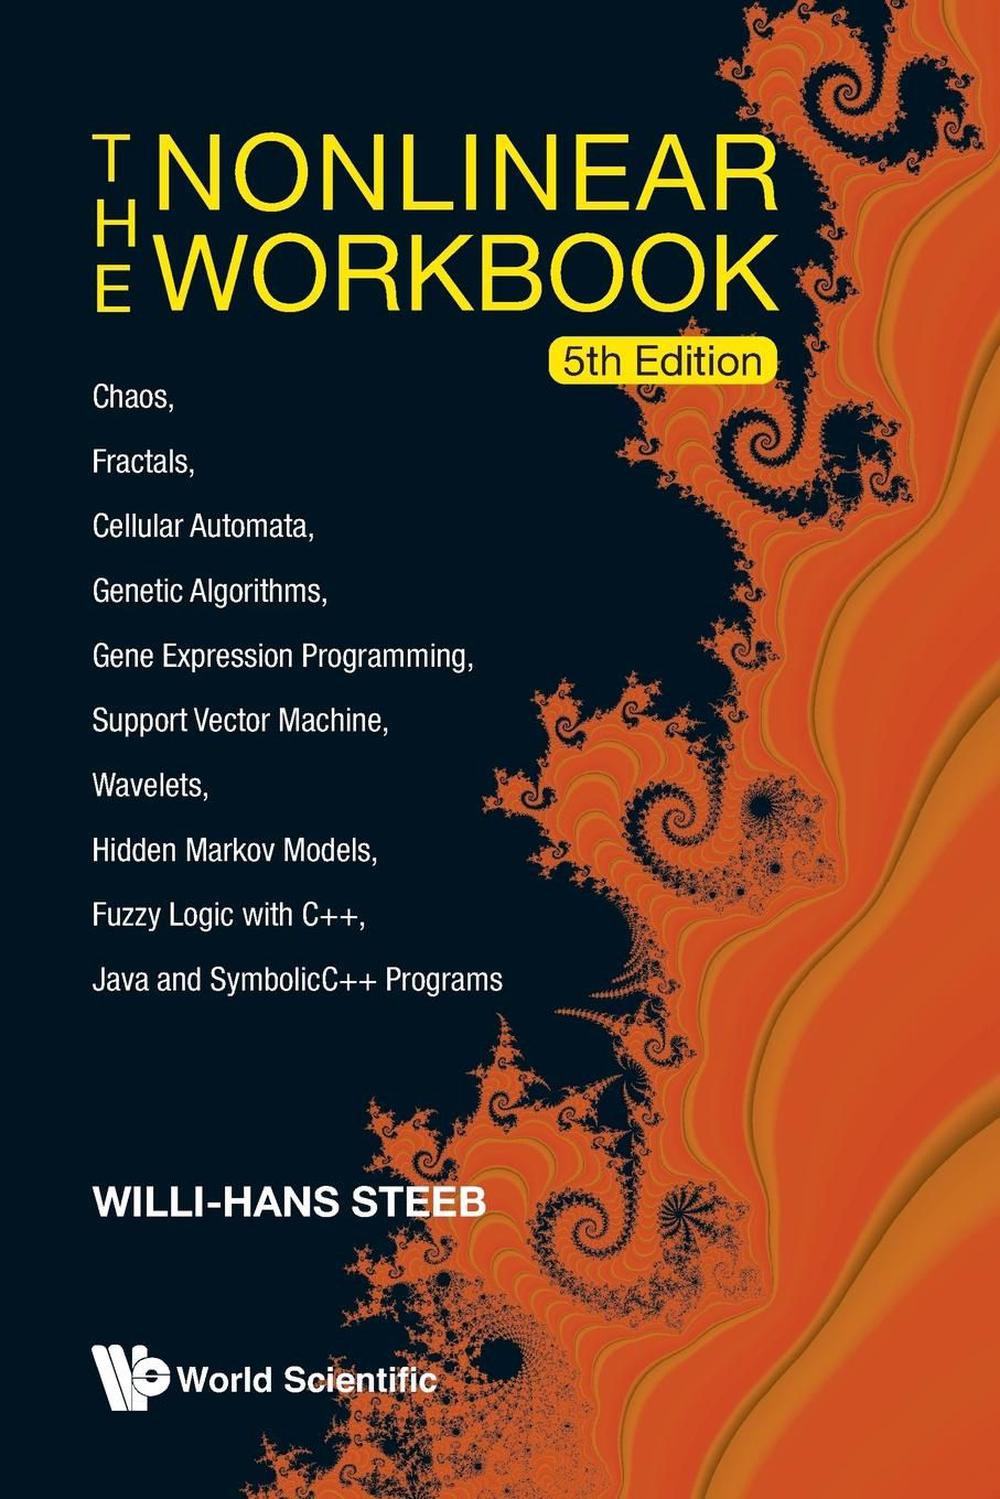 Workbook, The Chaos, Fractals, Cellular Automata,